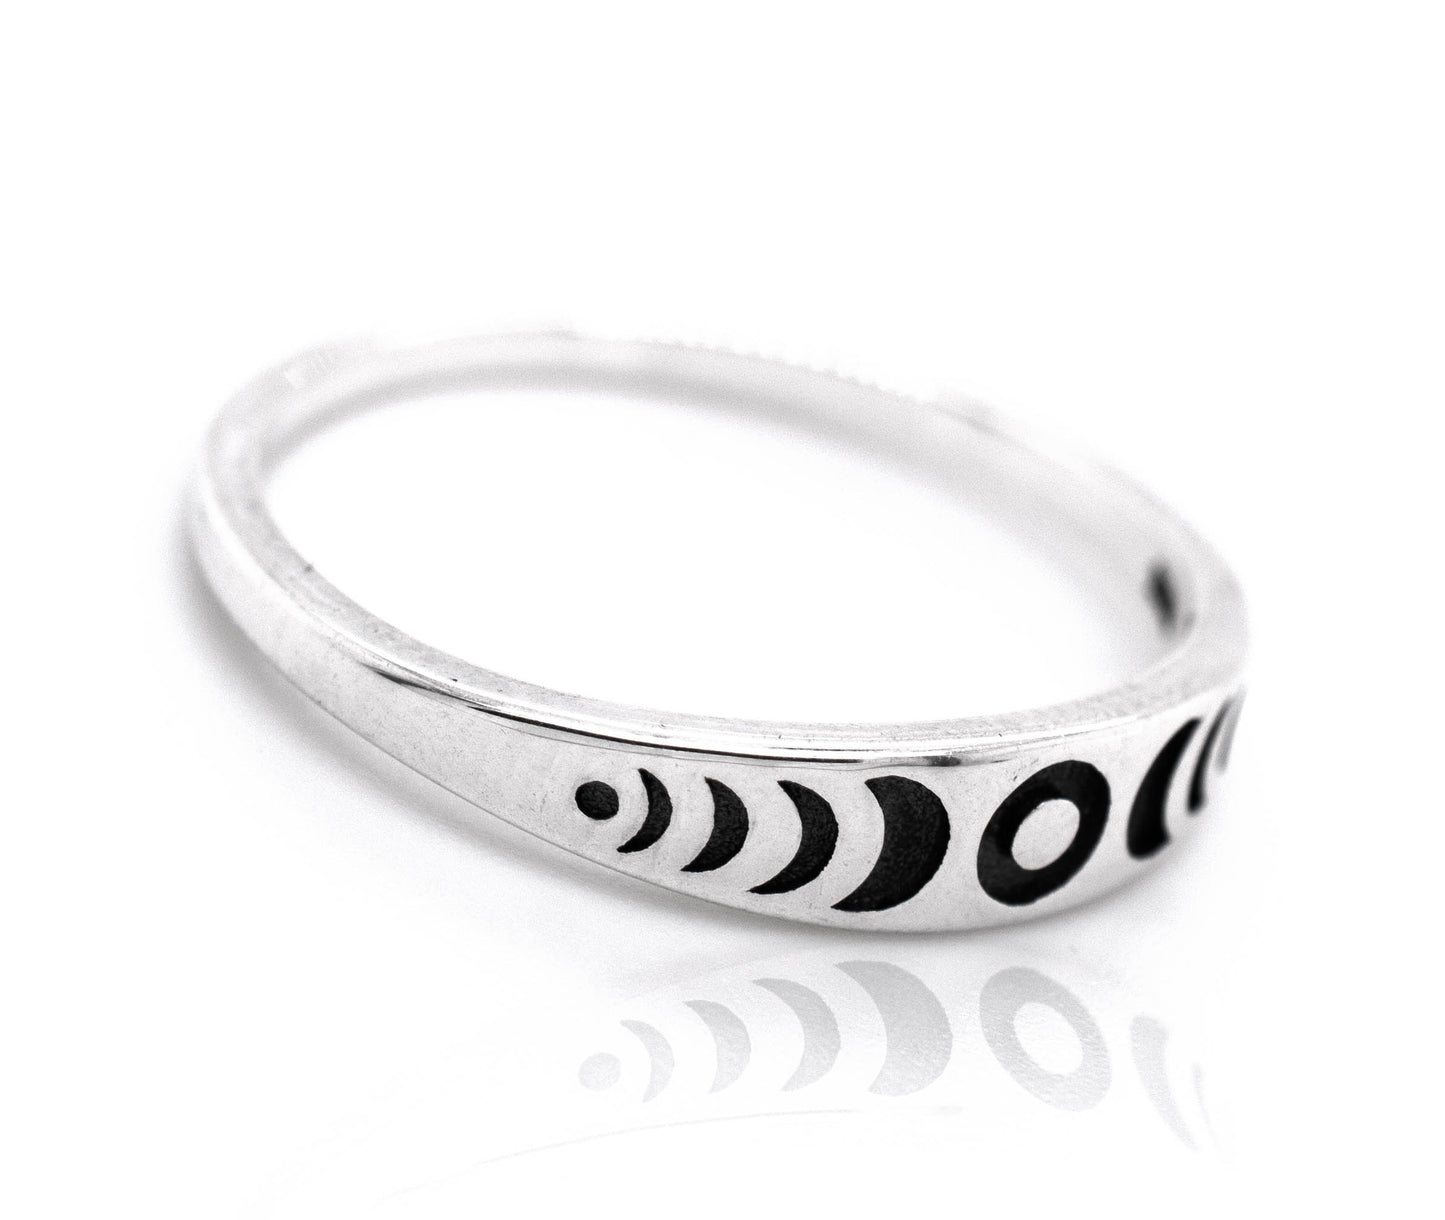 A Super Silver Moon Phases Band adorned with intricate black and white designs inspired by moon phases.